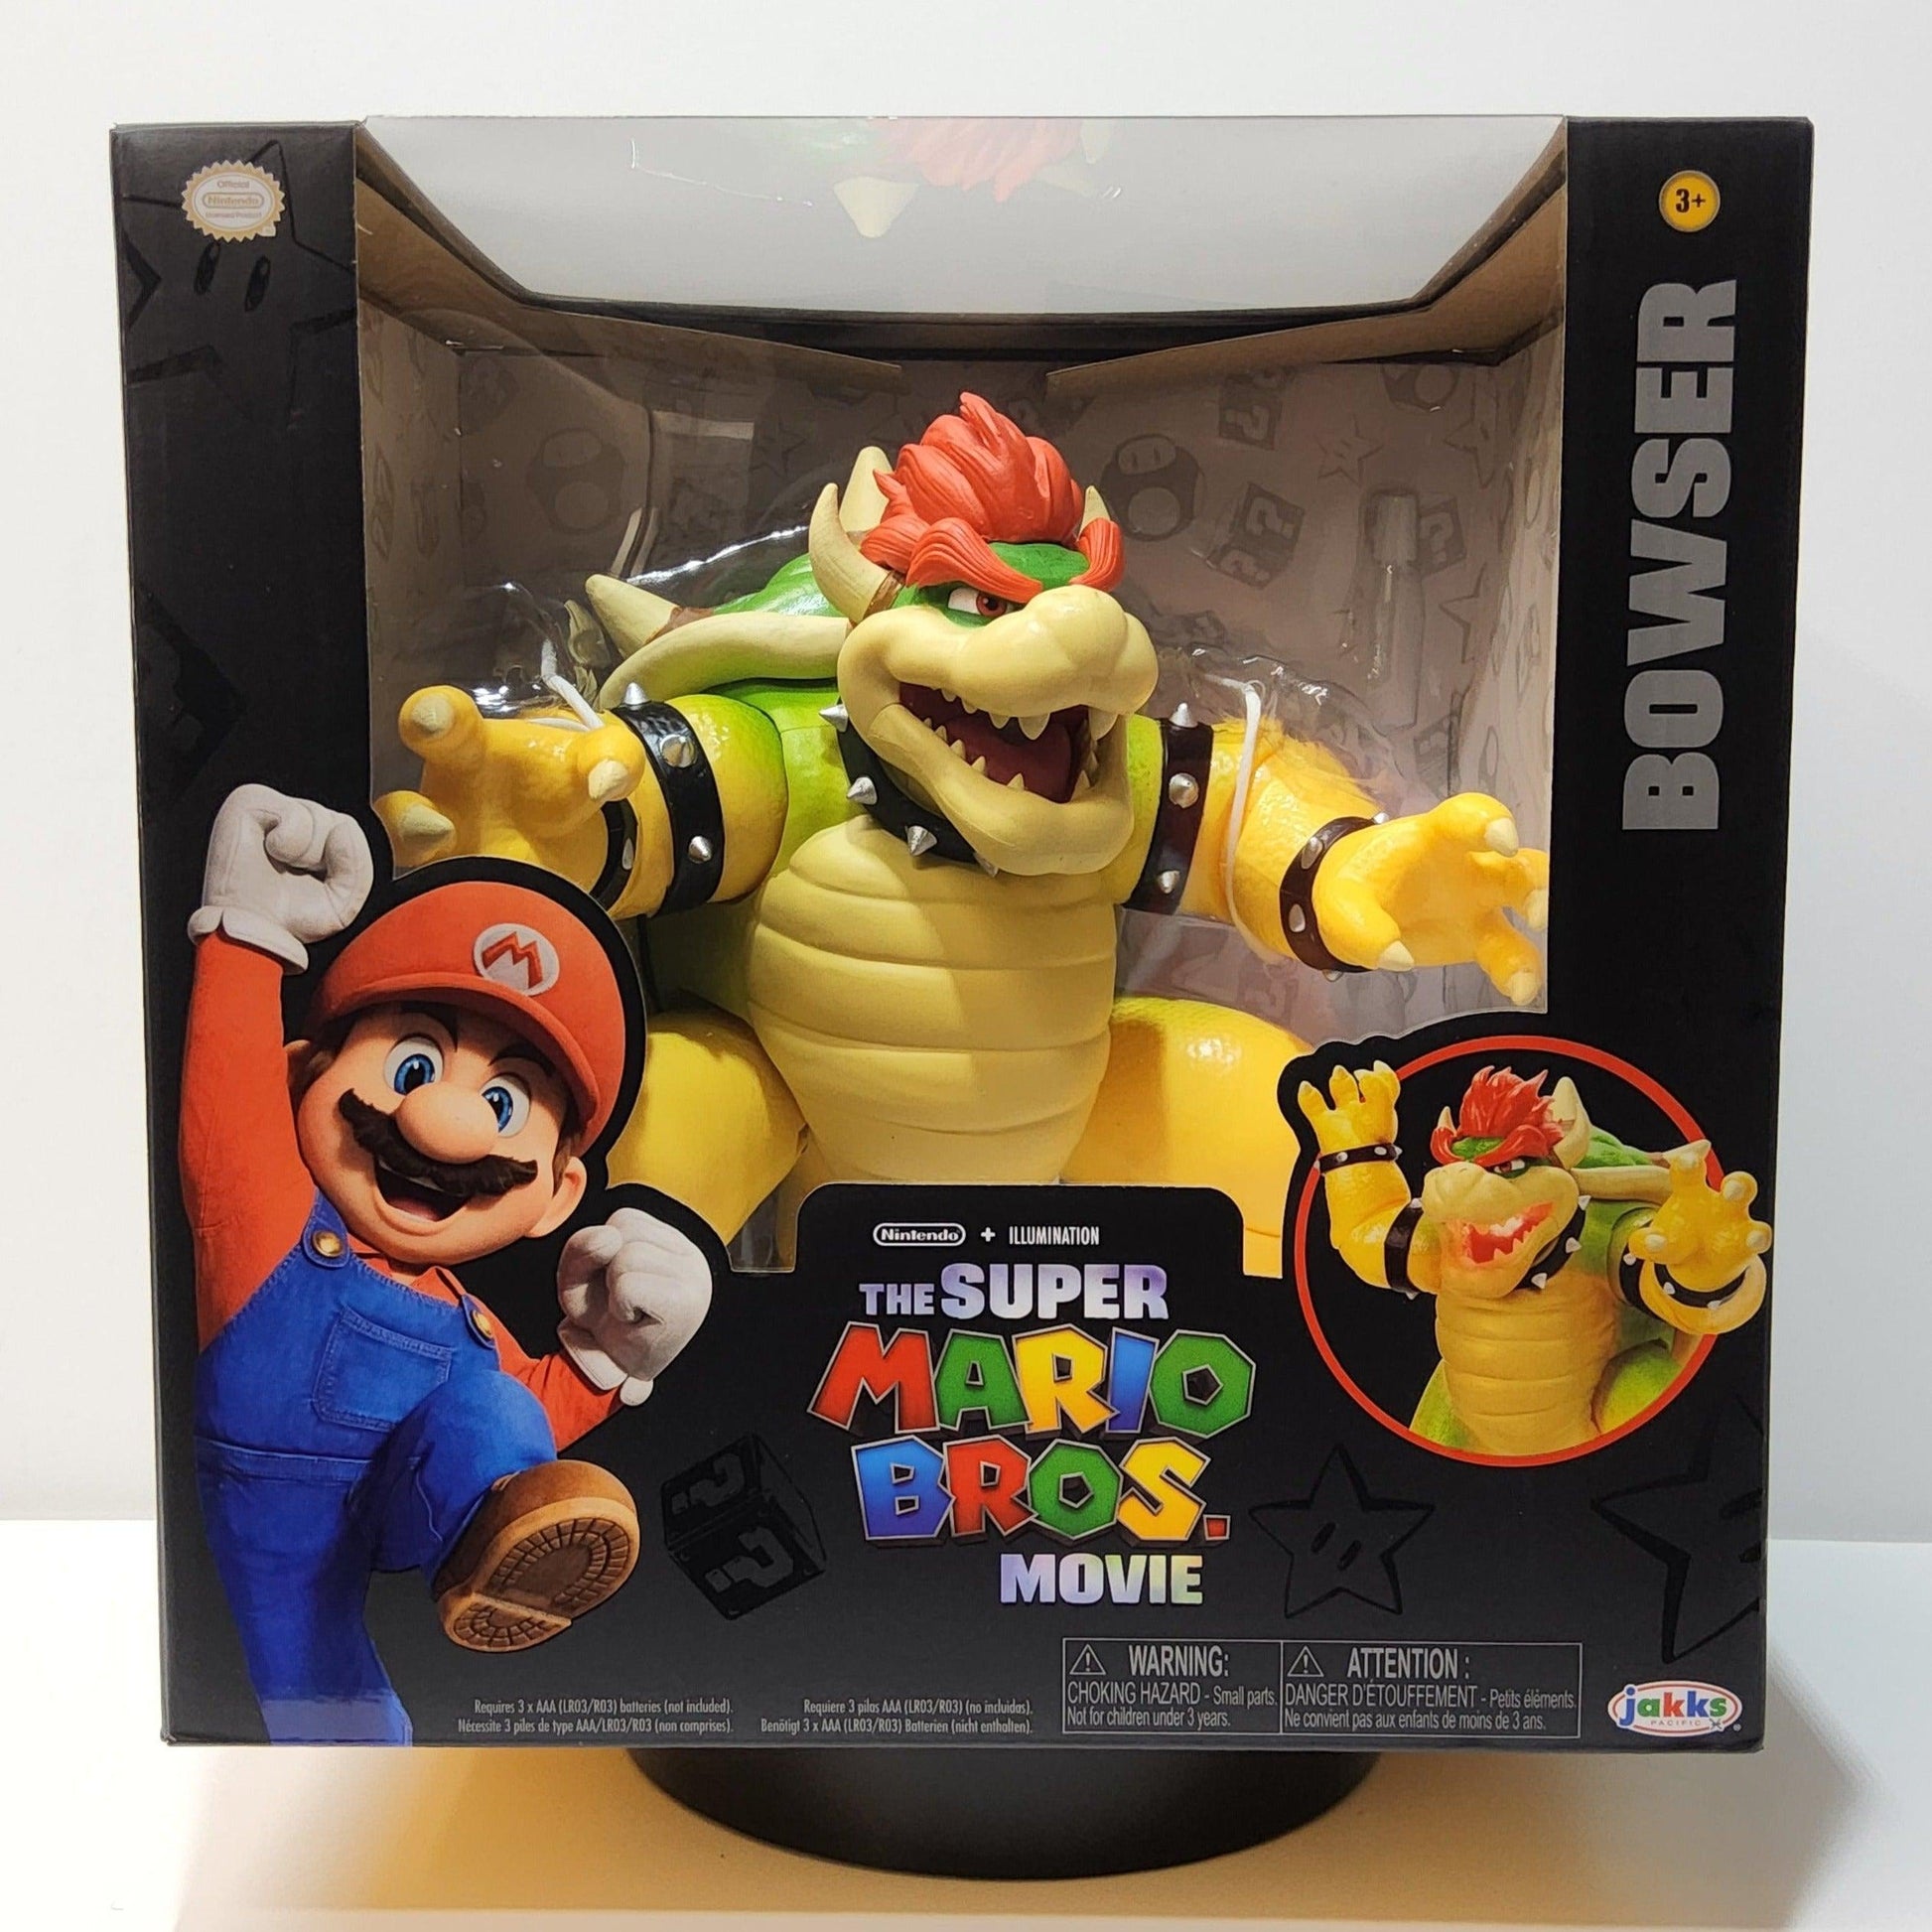 Mario And Bowser Are Advertising PS5s In China